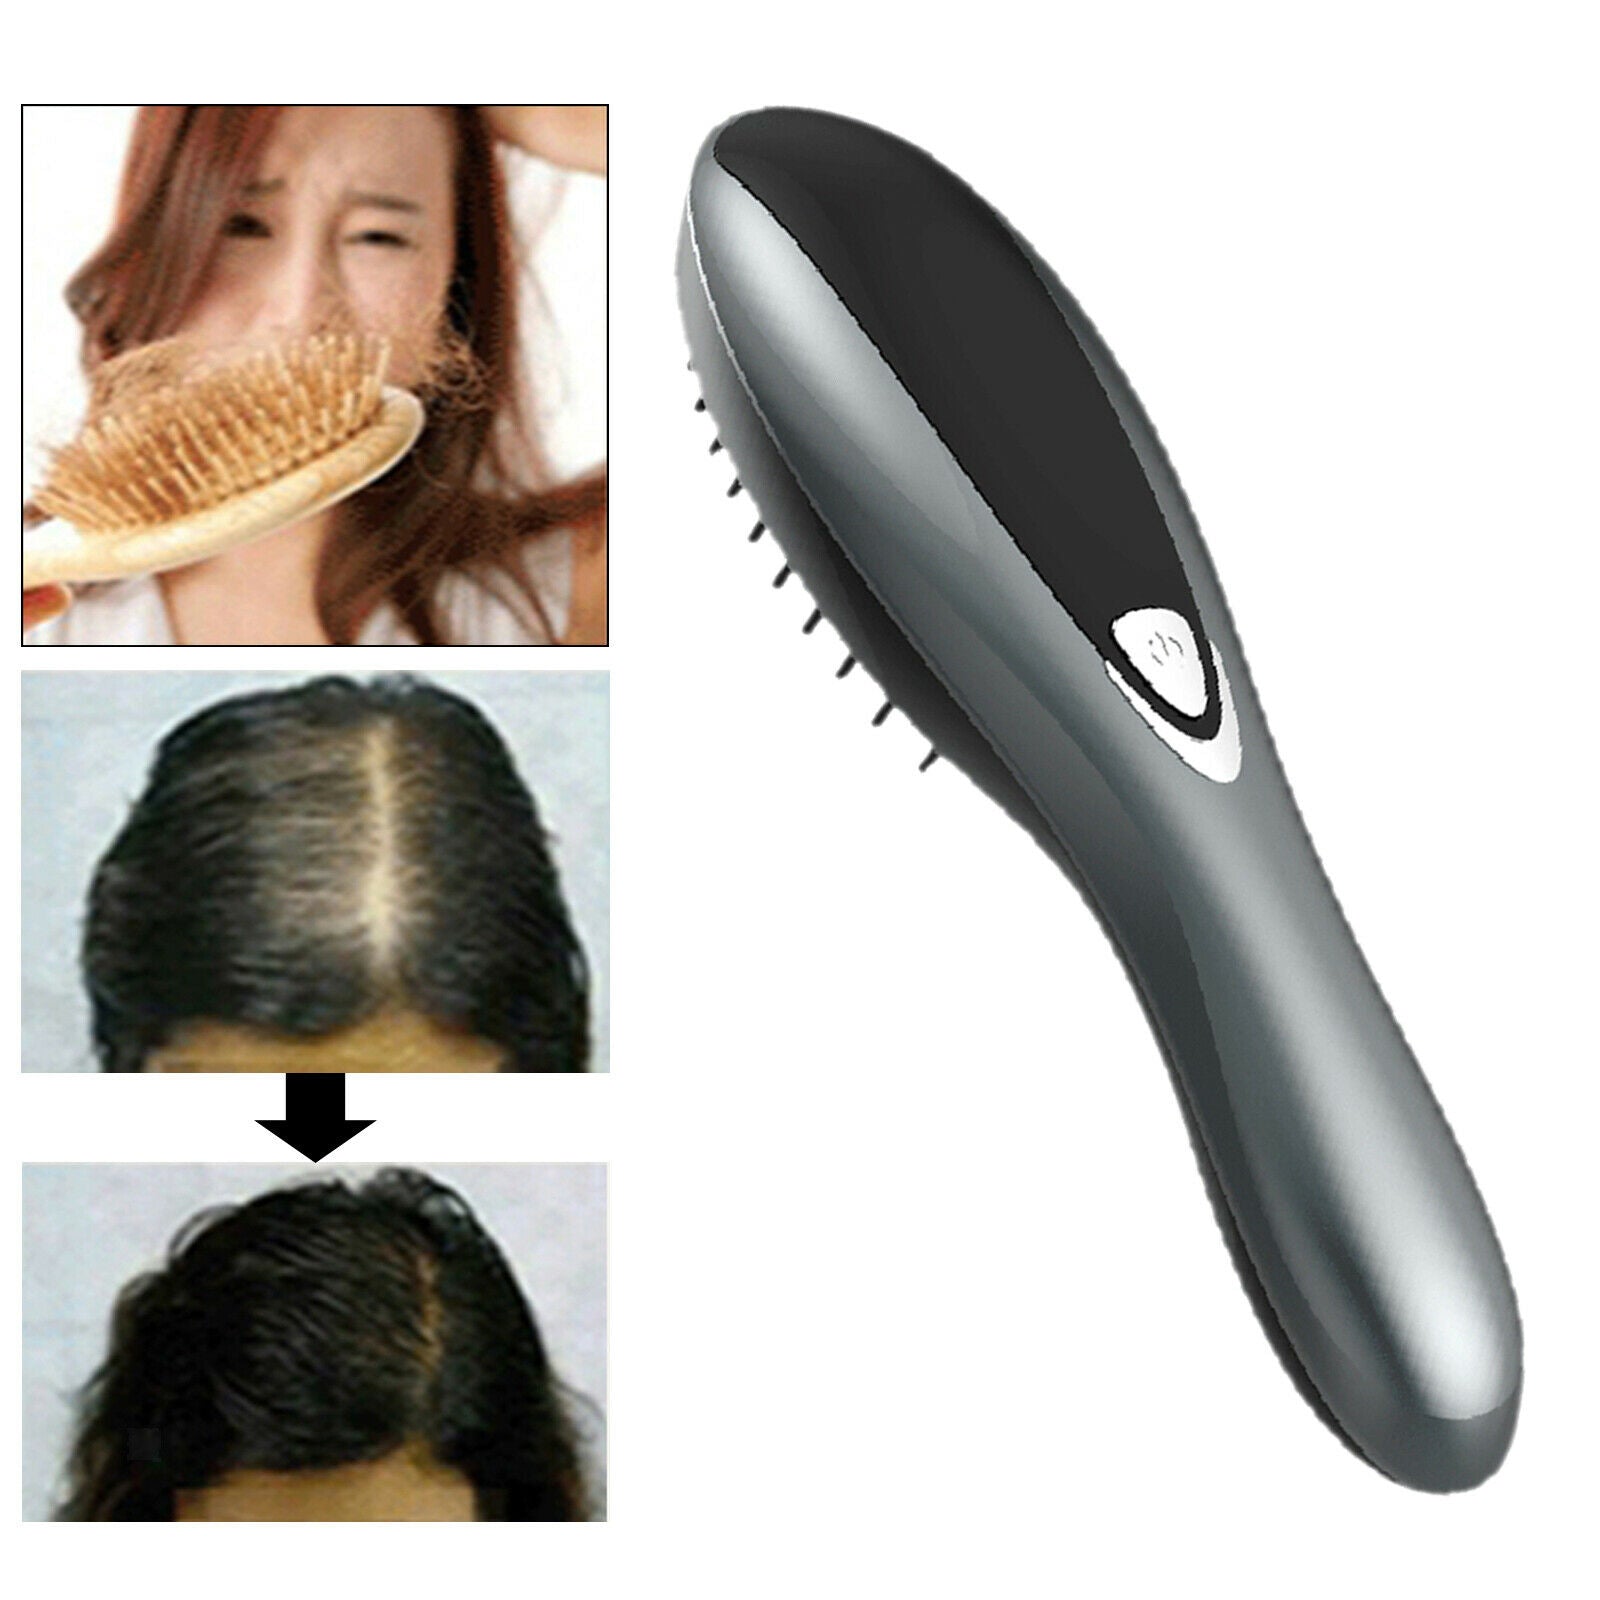 Portable Vibrating Electric Massage Comb for Man Woman 3 Modes USB Charging